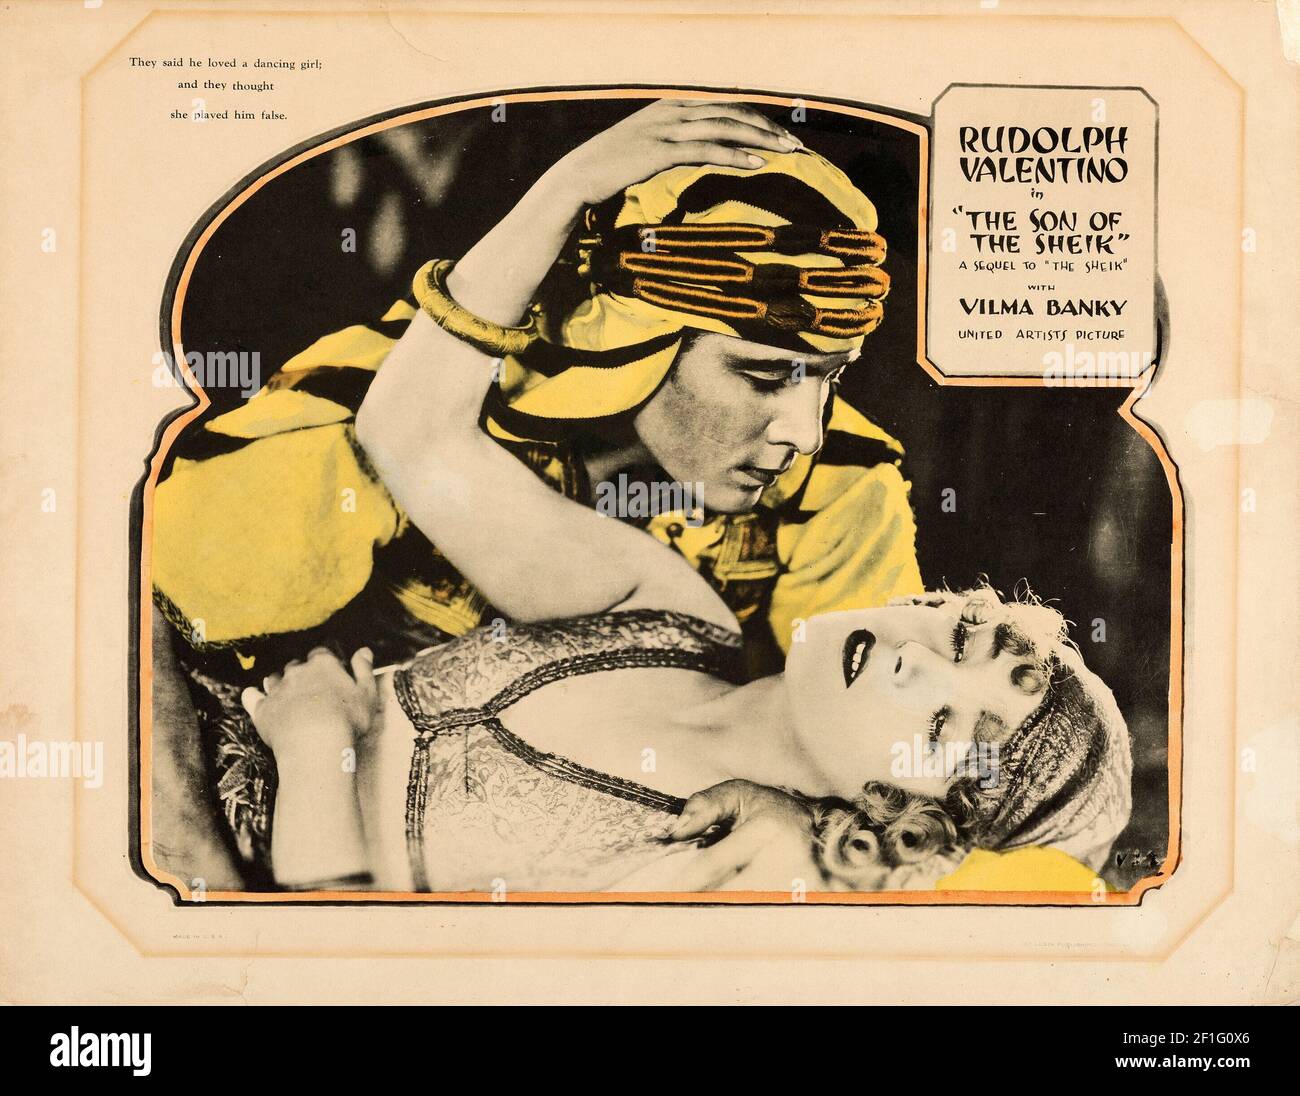 Rudolph Valentino in The Son of the Sheik. Classic movie poster, old and vintage. 1926. Stock Photo